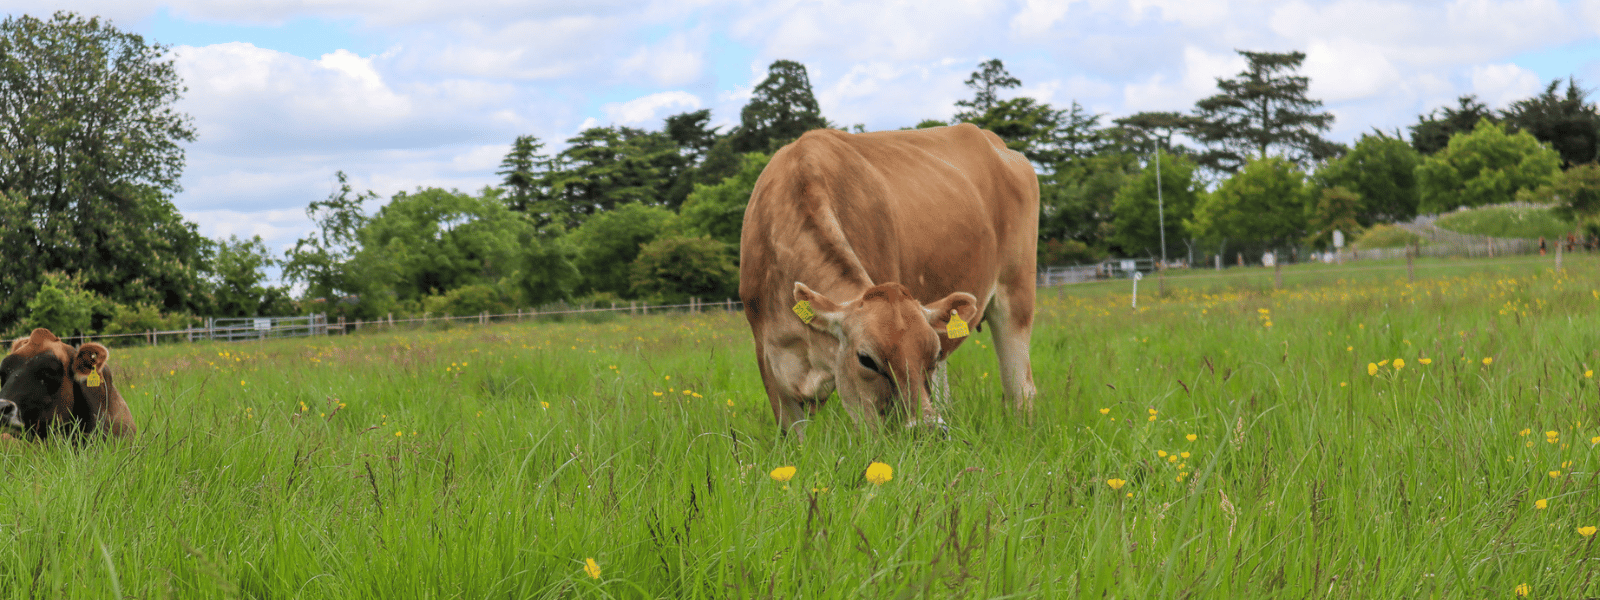 https://www.airfield.ie/wp-content/uploads/2022/12/Jersey-cow-at-Airfield-Estate-Dundrum.png